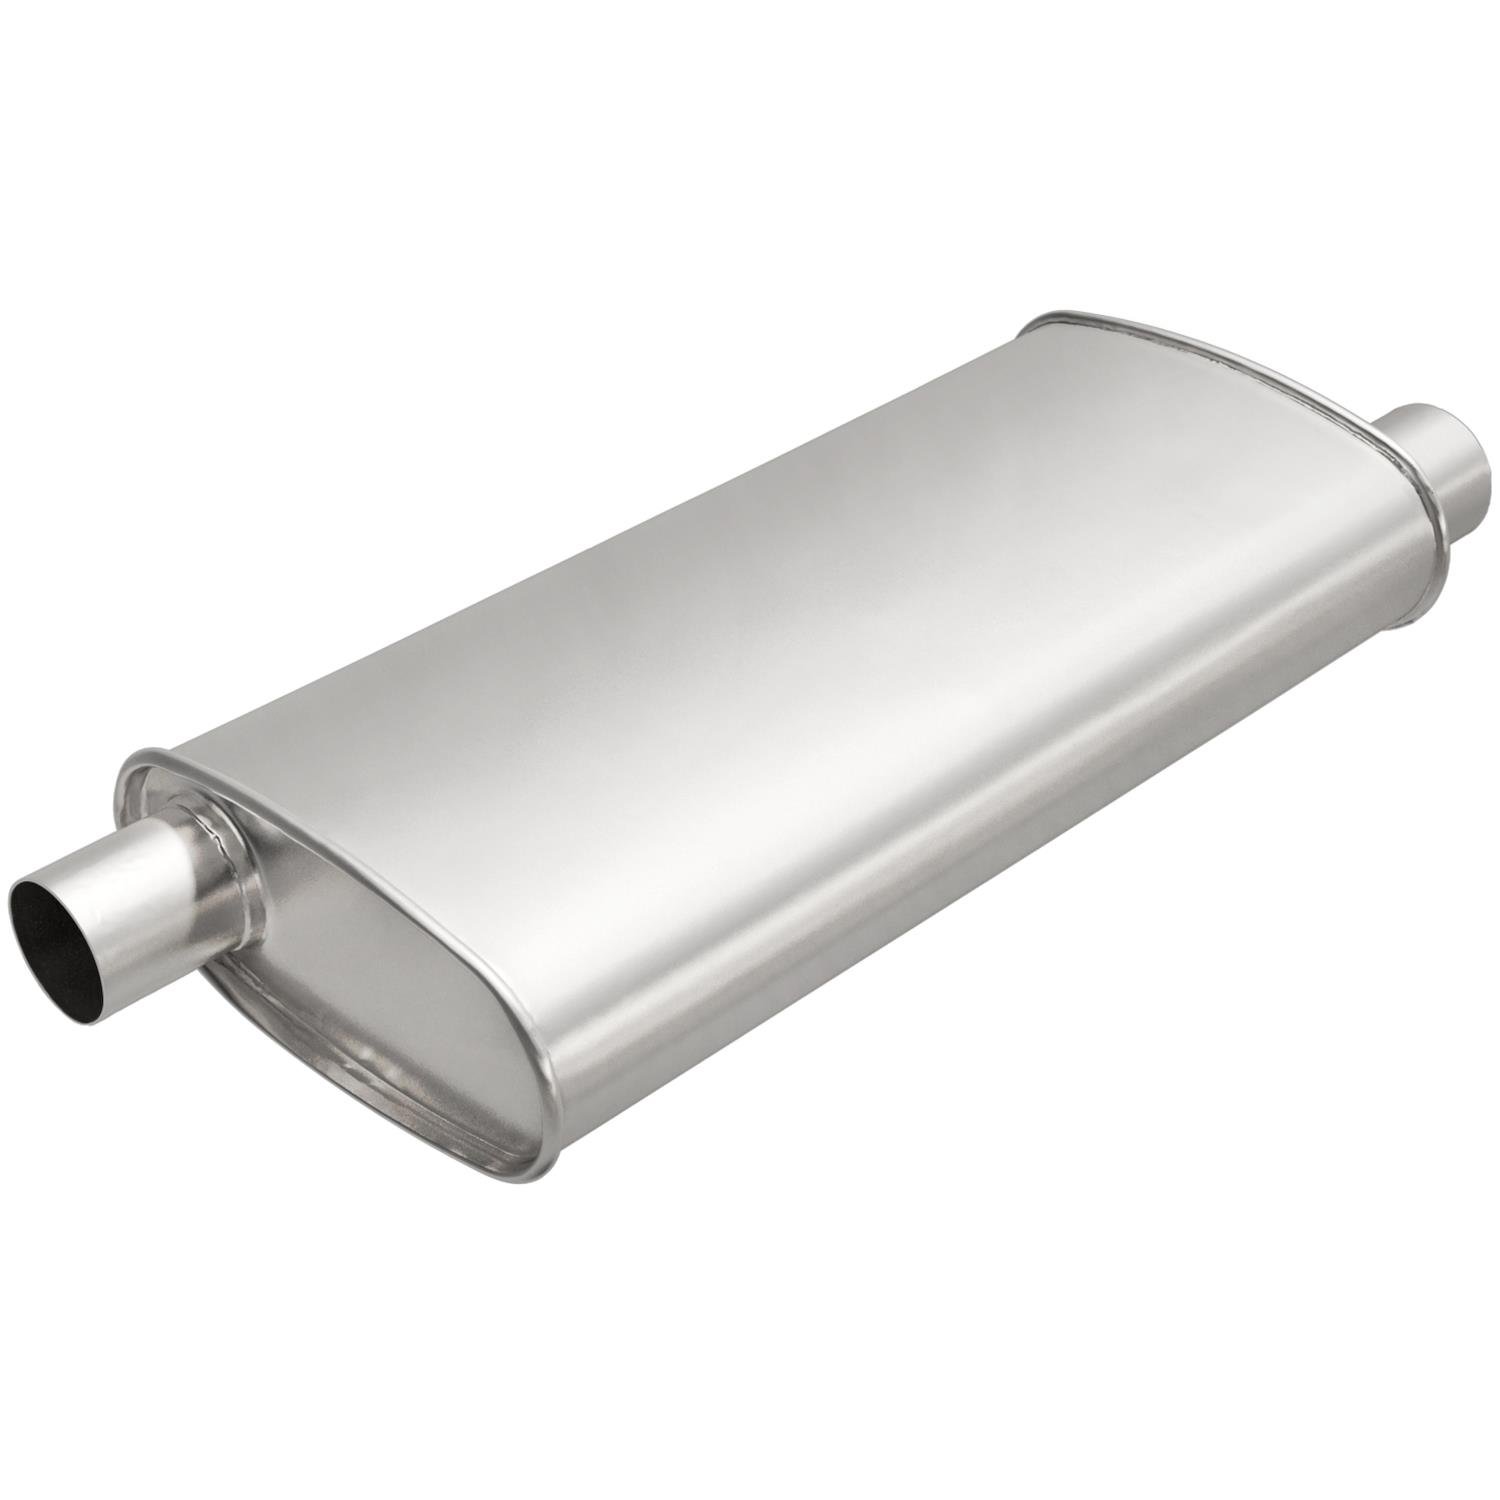 Universal Exhaust Muffler, Oval, Inlet/Outlet: 2.50 in./2.25 in. , Offset/Offset